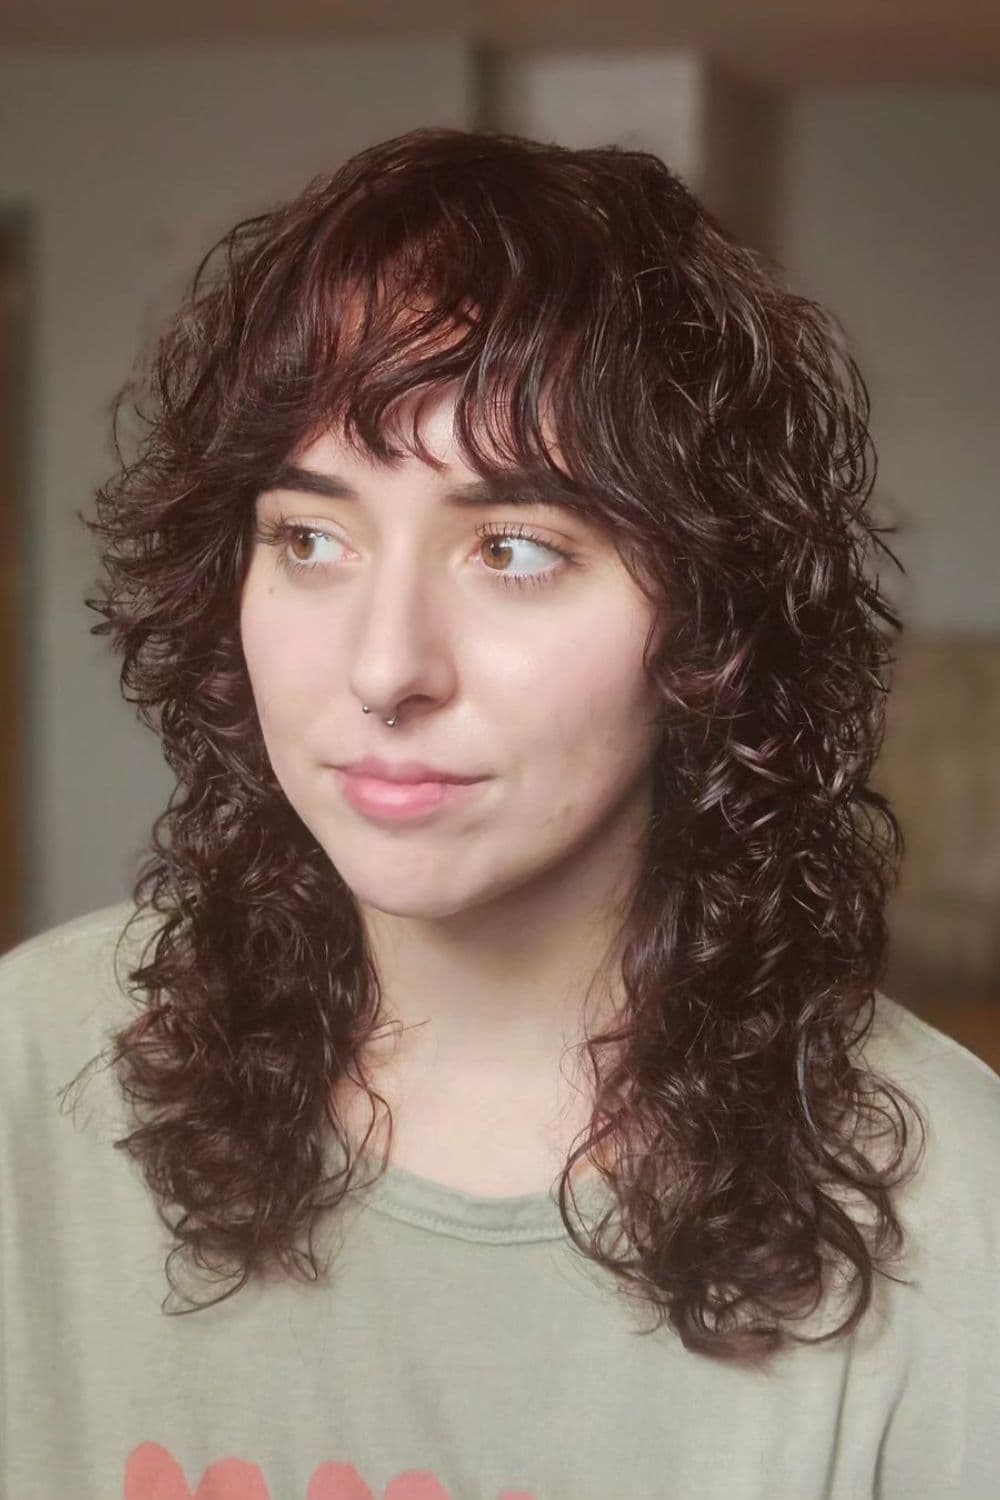 A woman with medium-length curly hair with curly bangs.